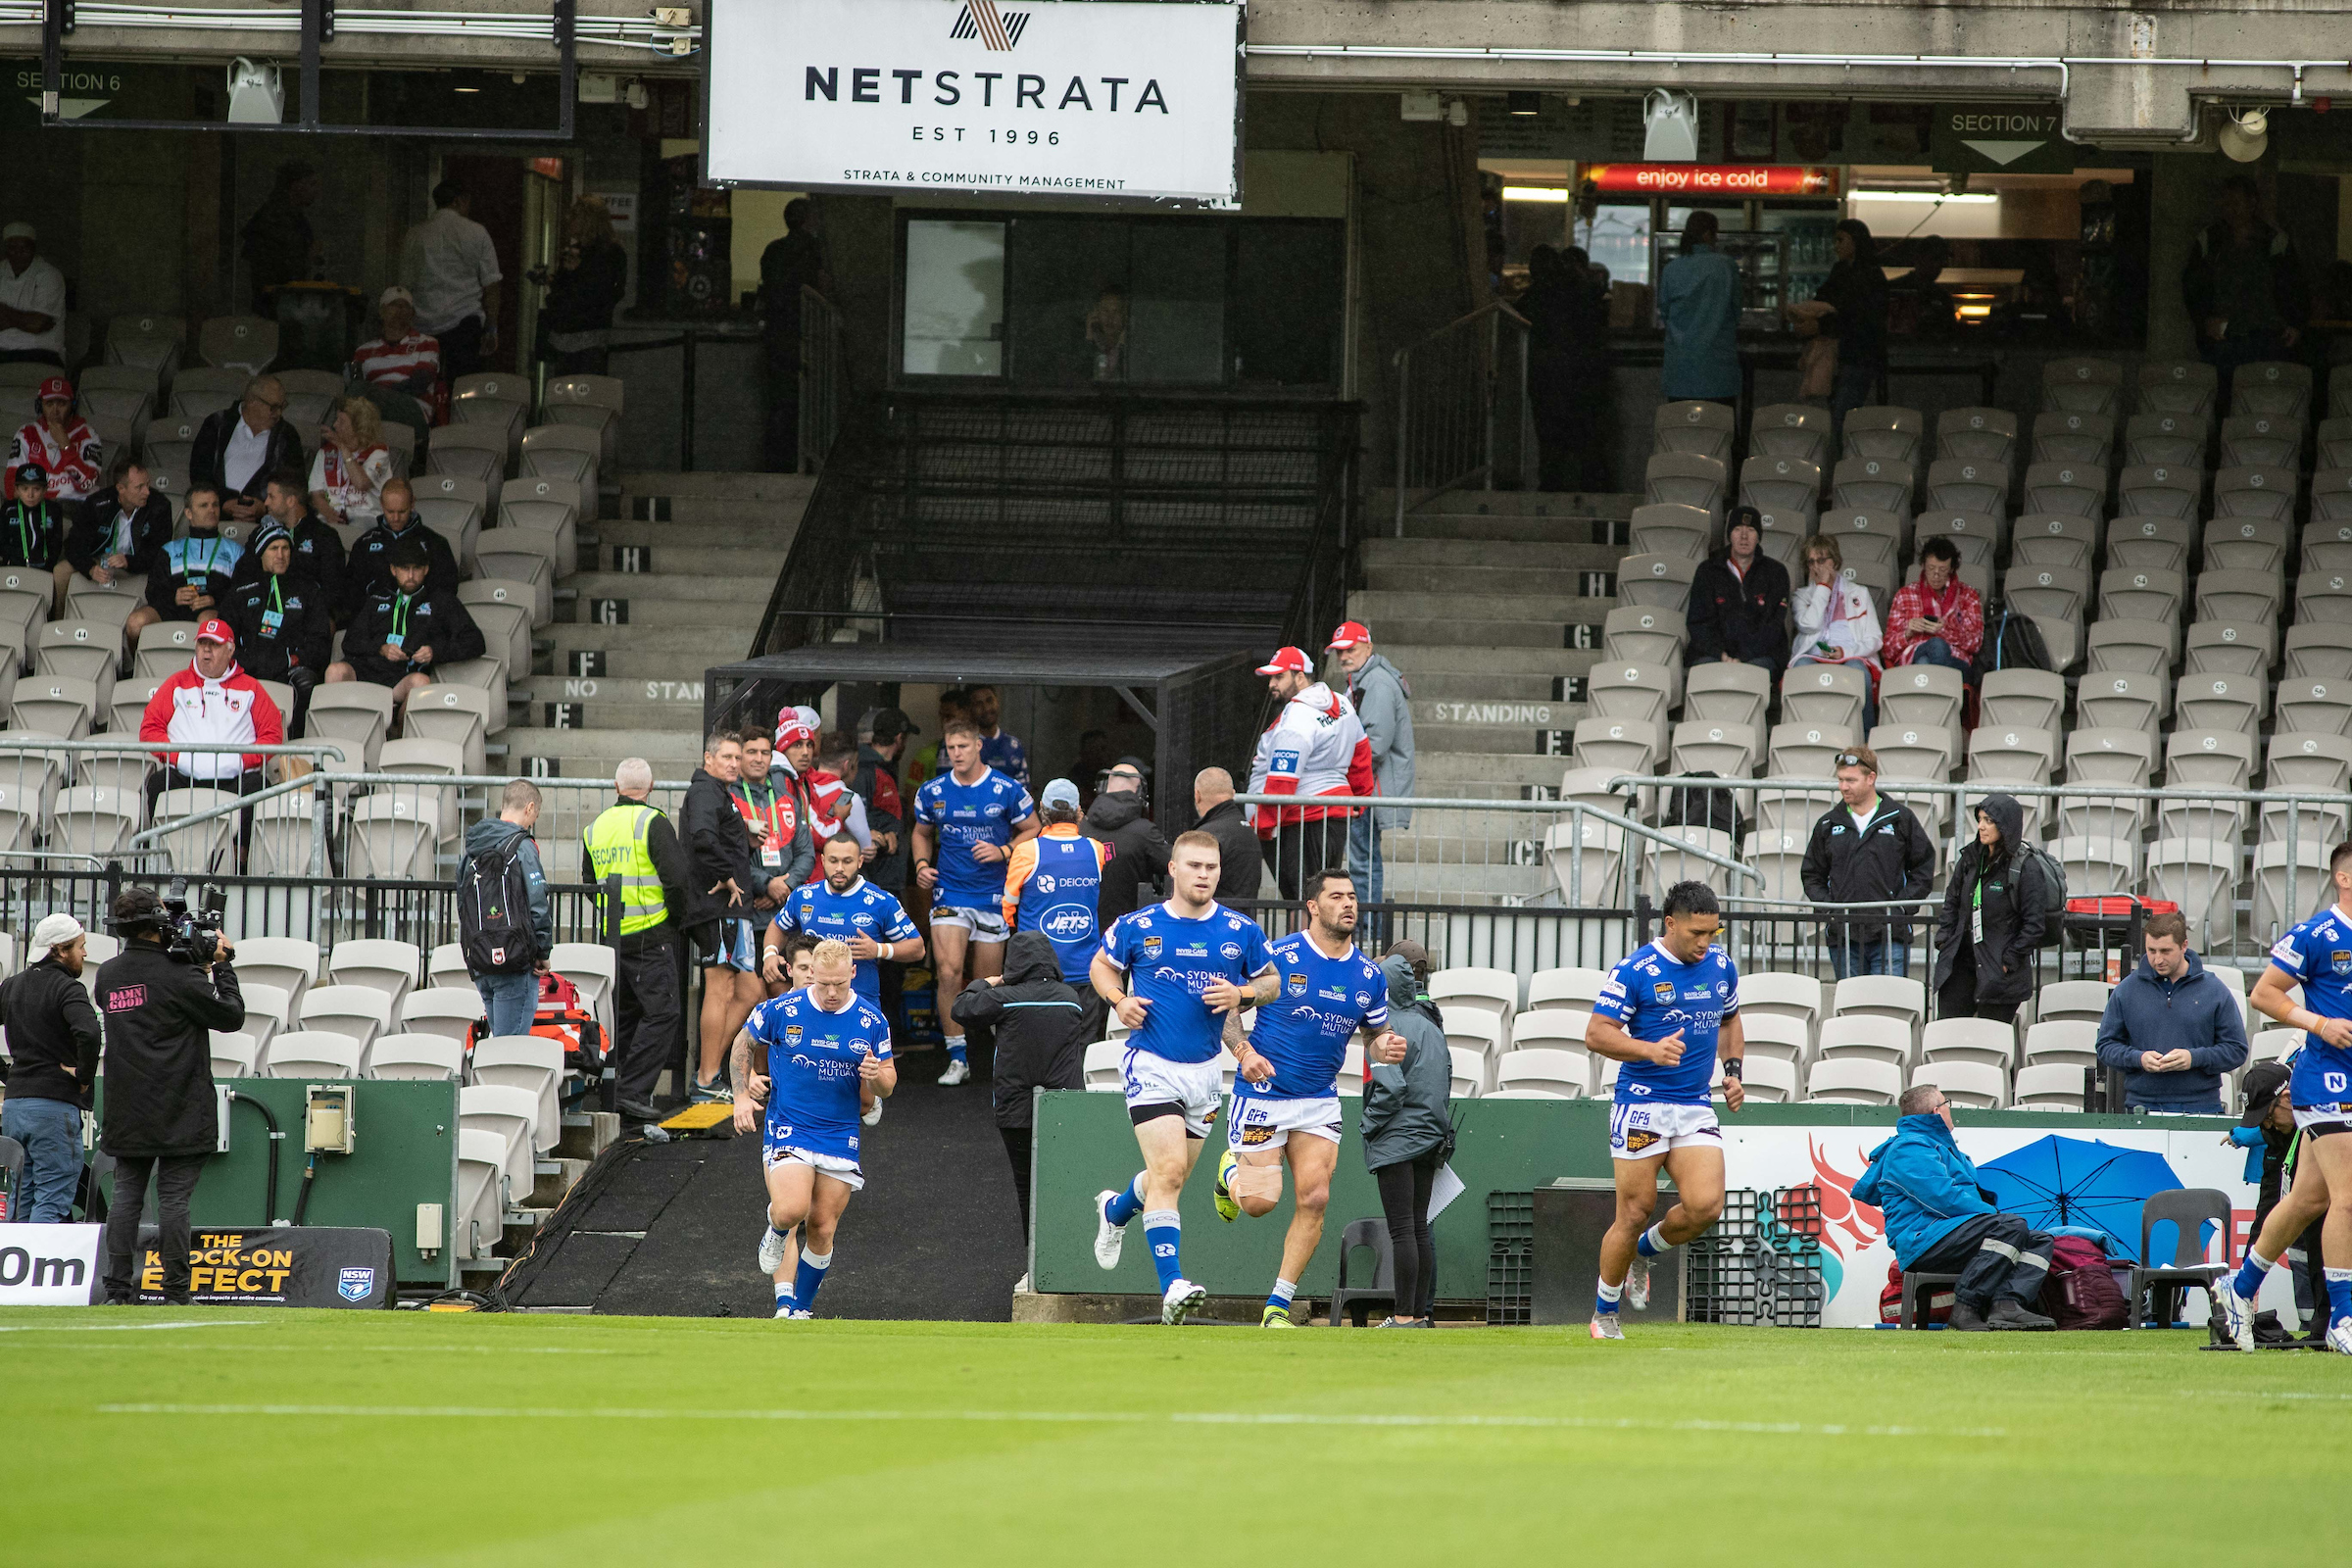 The Newtown Jets are pictured taking the field last Sunday (14th March) at Netstrata Jubilee Stadium, Kogarah. This was Newtown’s first rugby league competition match since the 15th March 2020.

 